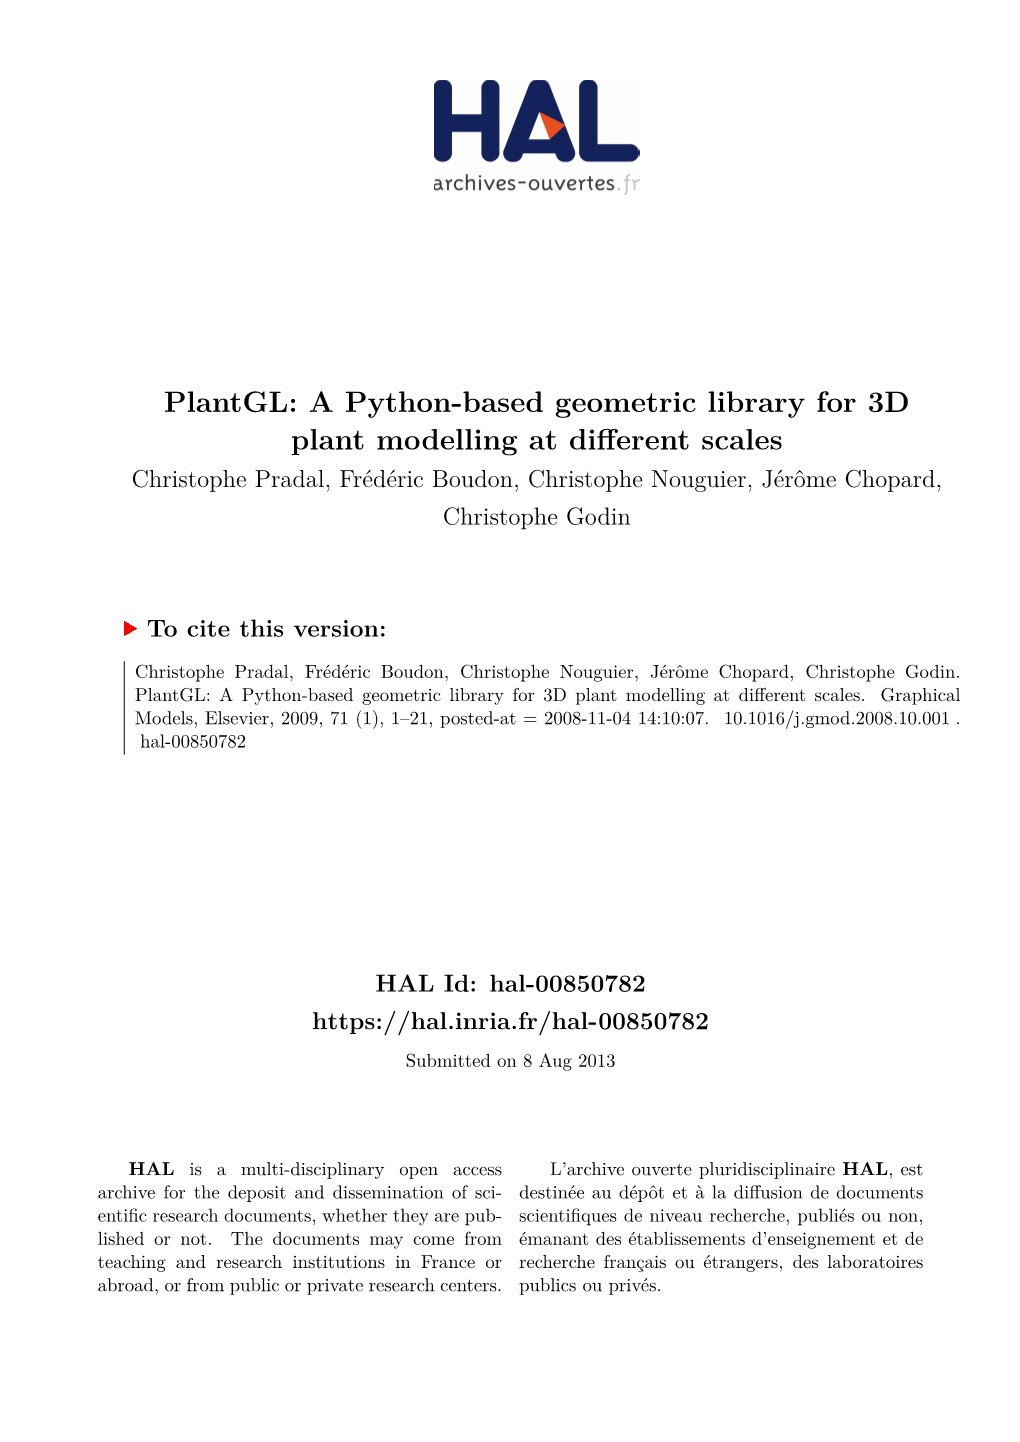 Plantgl: a Python-Based Geometric Library for 3D Plant Modelling At